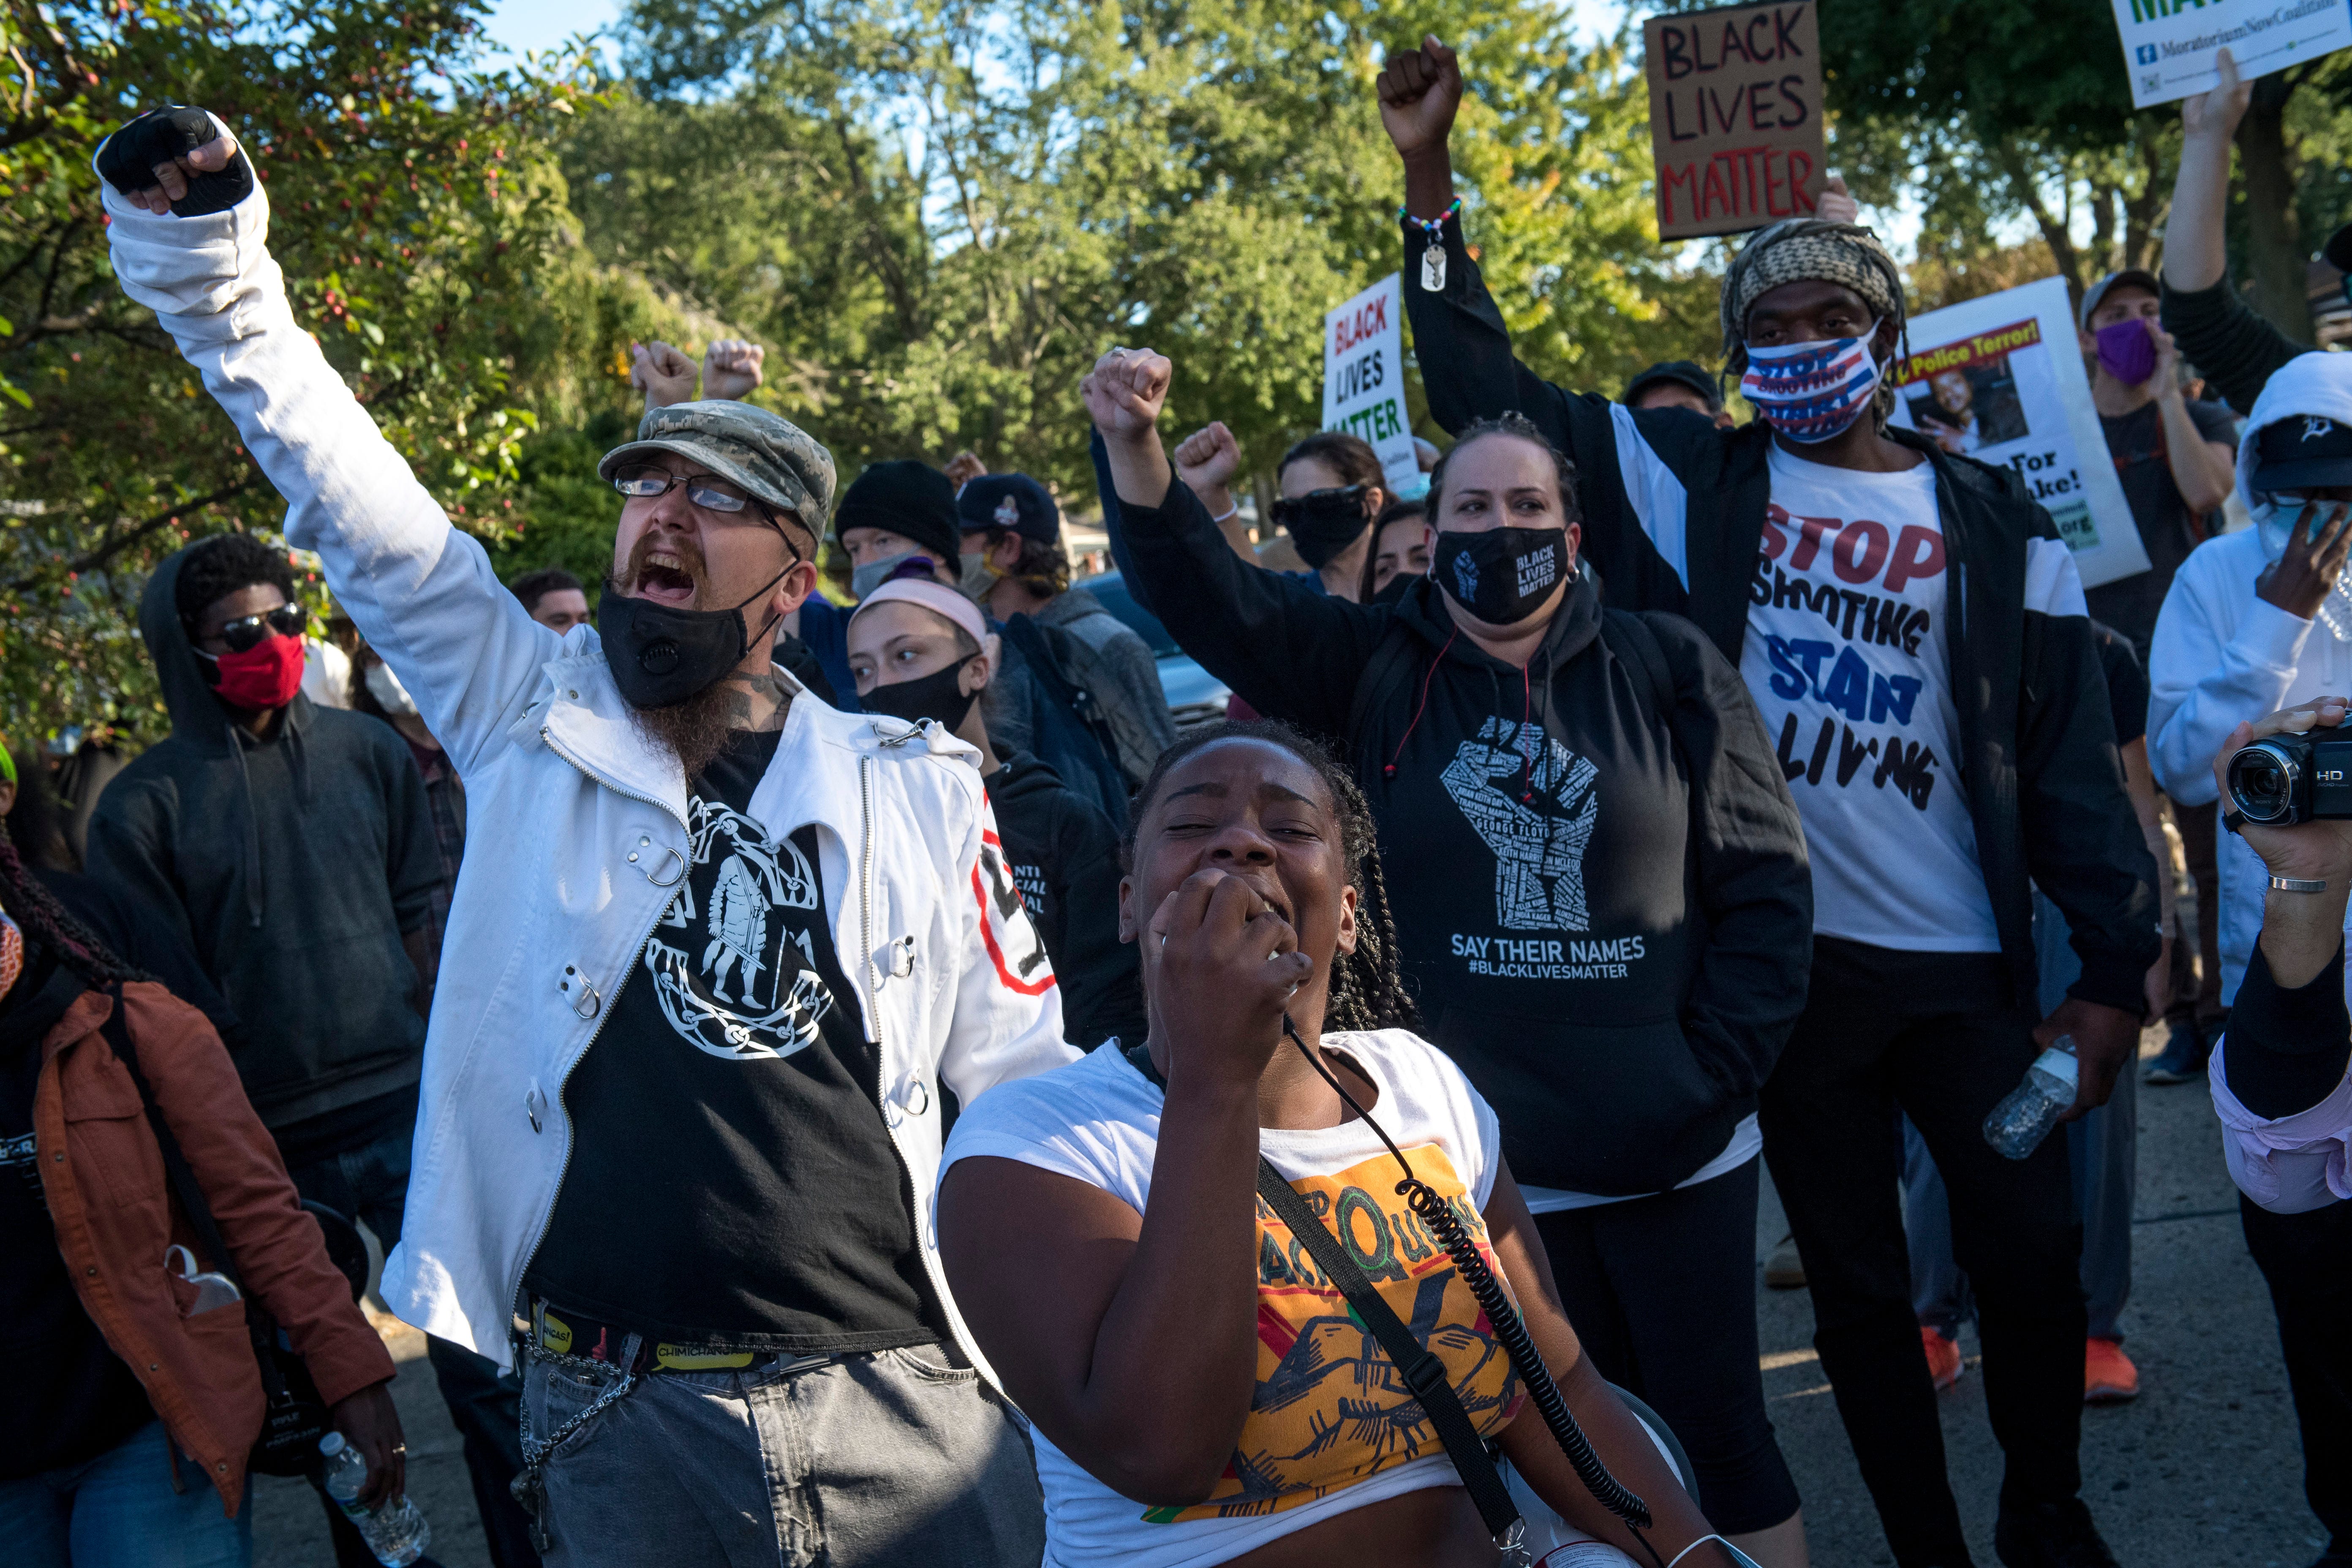 Shaqualla Johnson of Detroit chants during the March Against Racism in Warren on Sept. 19, 2020. The march in Warren occurred in response to what the city called hate crimes that terrorized residents Candace Hall, her husband Eddie and their two children.